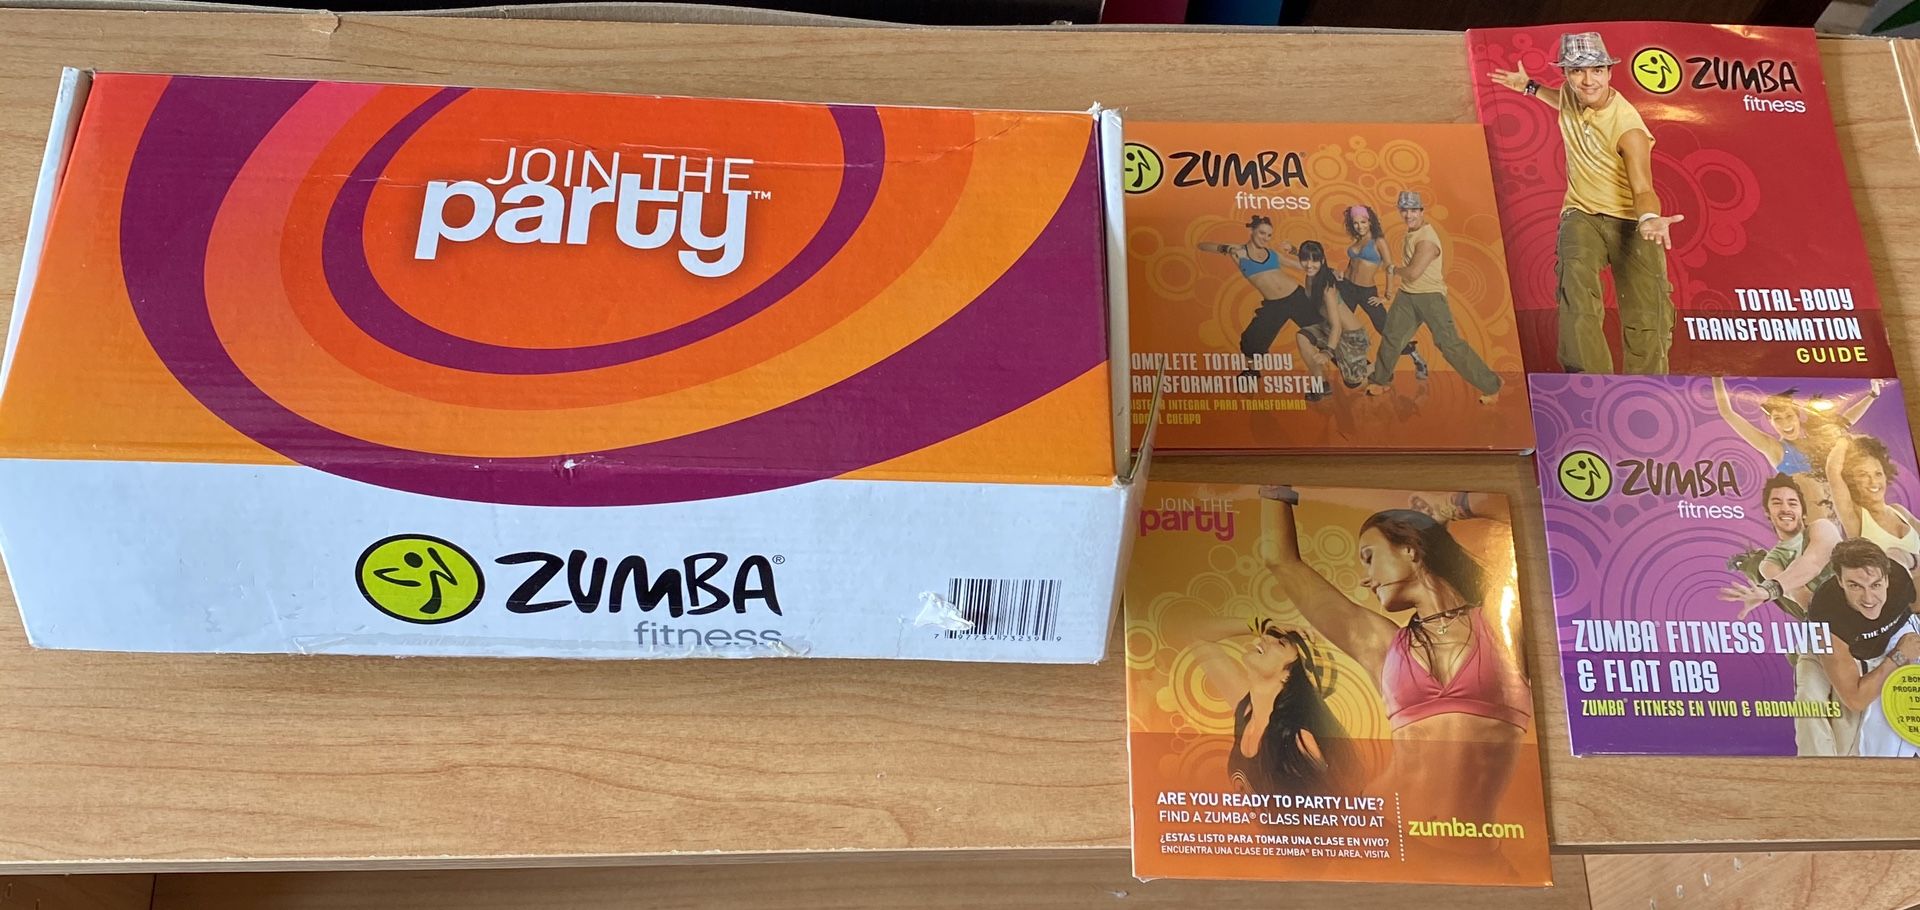 Zumba Set-Best offer! DVD’s and accessories